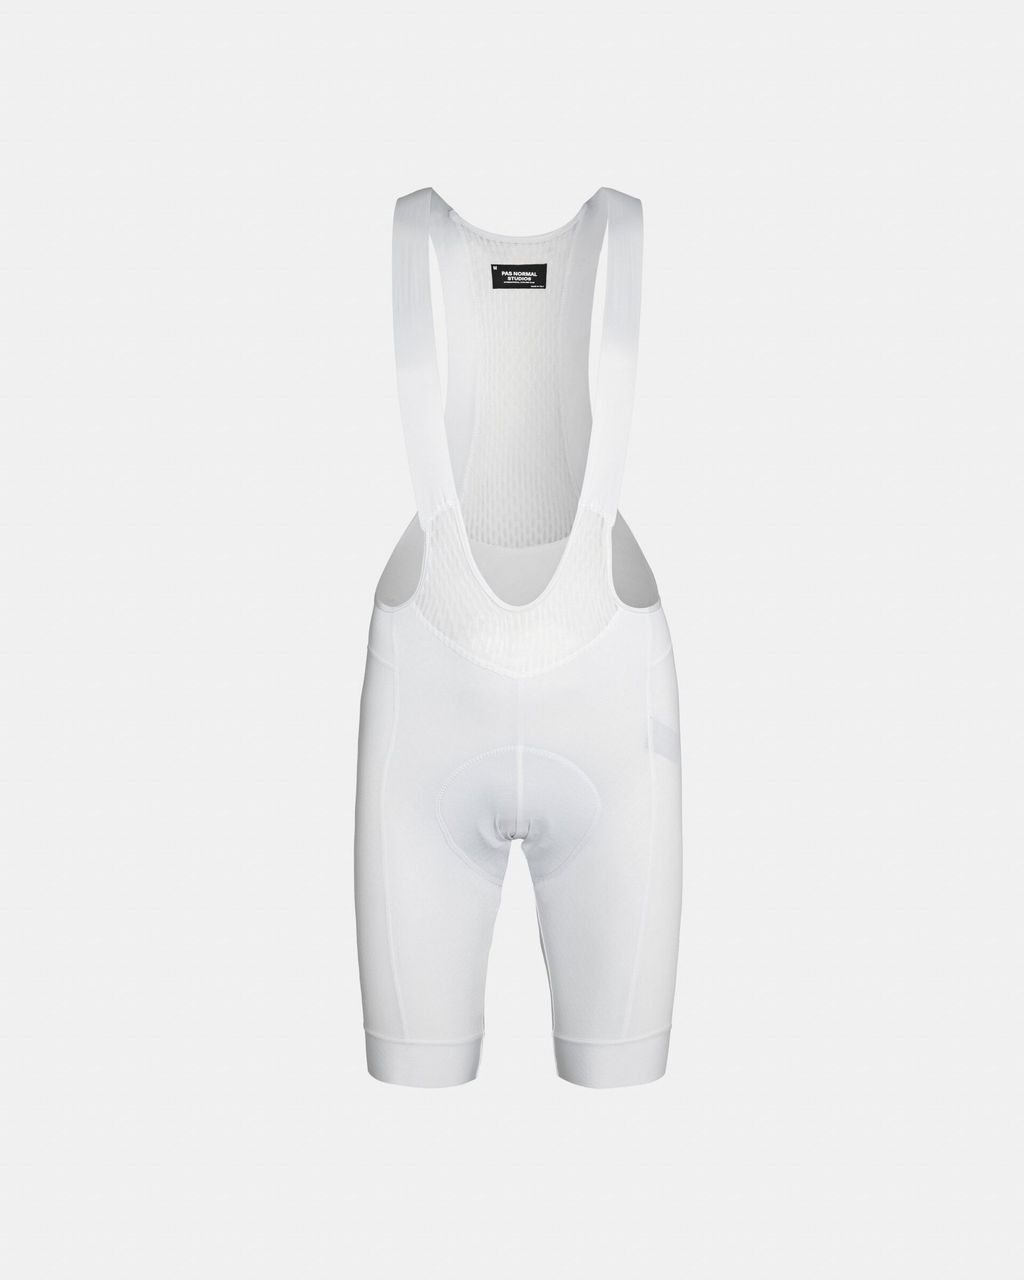 Mens-Mechanism-Bibs-White_Front-pdp-page